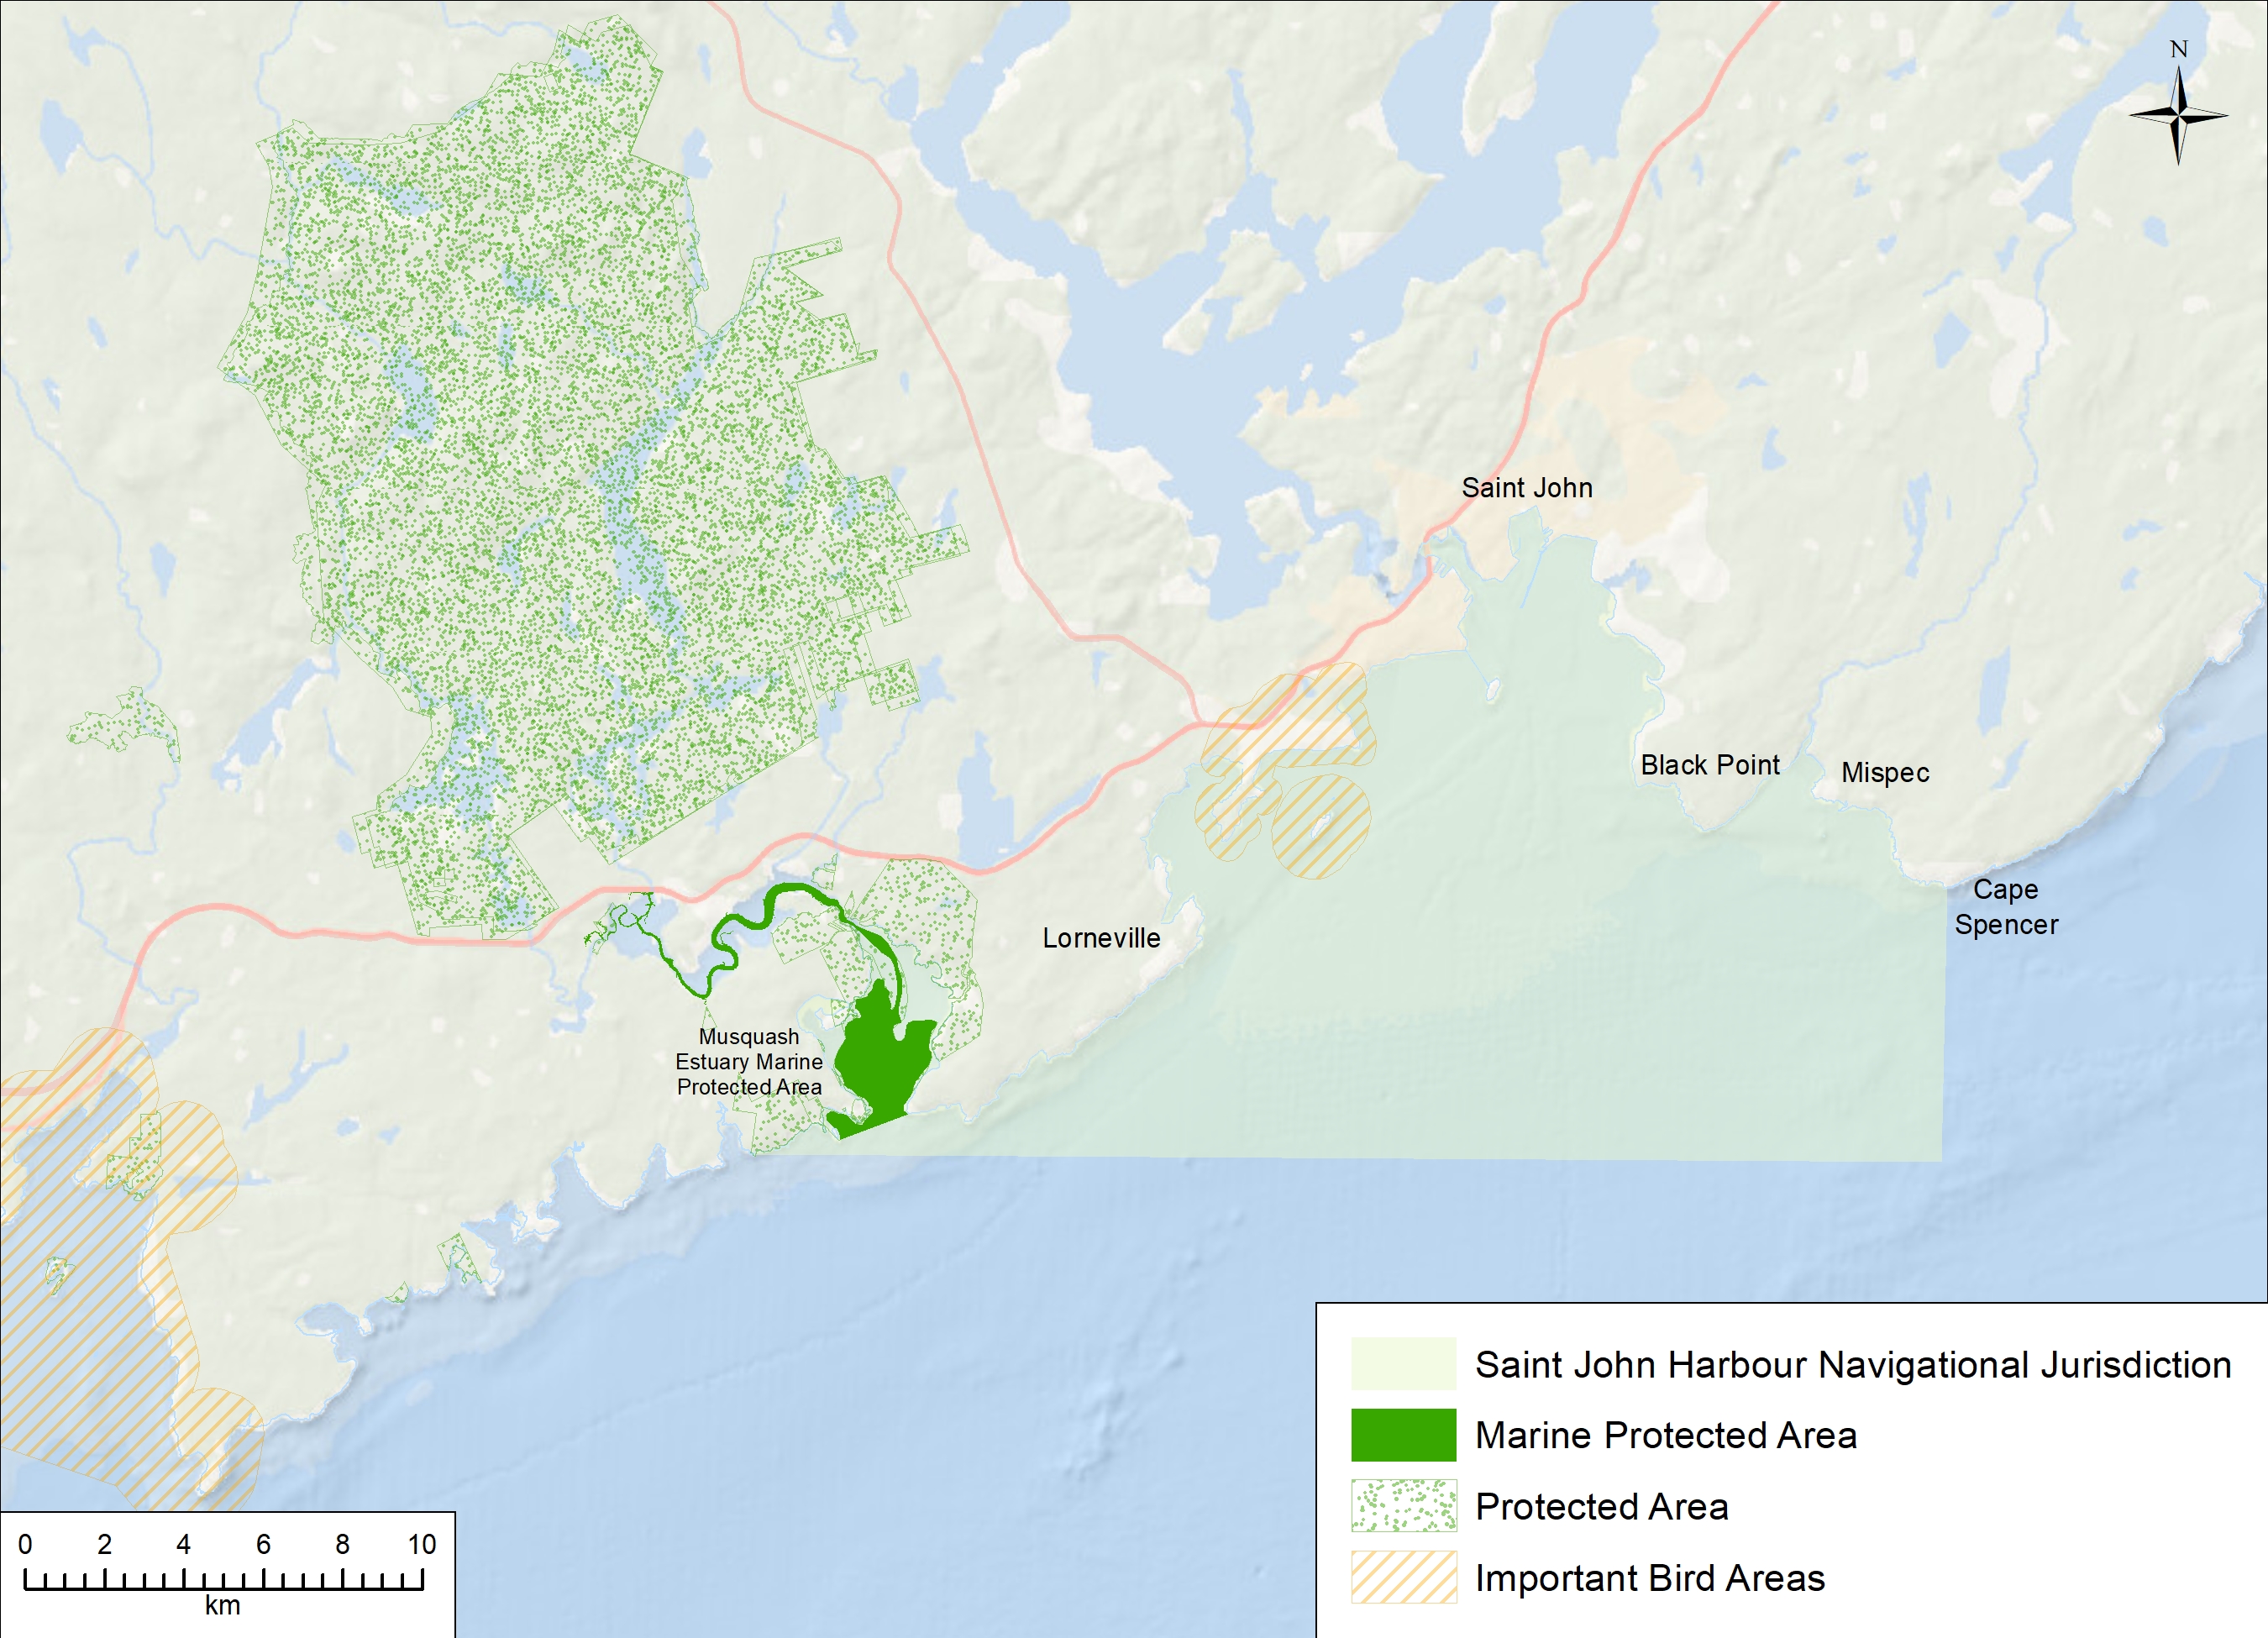 Terrain map of Port of Saint John study site. The study area is a marine area highlighted in light green. The boundary extends from the city of Saint John in the north, to Cape Spencer in the southeast and to the Musquash Harbour in the southwest, forming an triangle-like shape. There are two small islands in the northwest of the study area. Along with the study area, Musquash Harbour is shown in dark green, as well as the Protected Area adjacent to the study site and important bird areas. The scale of the map is 10km.